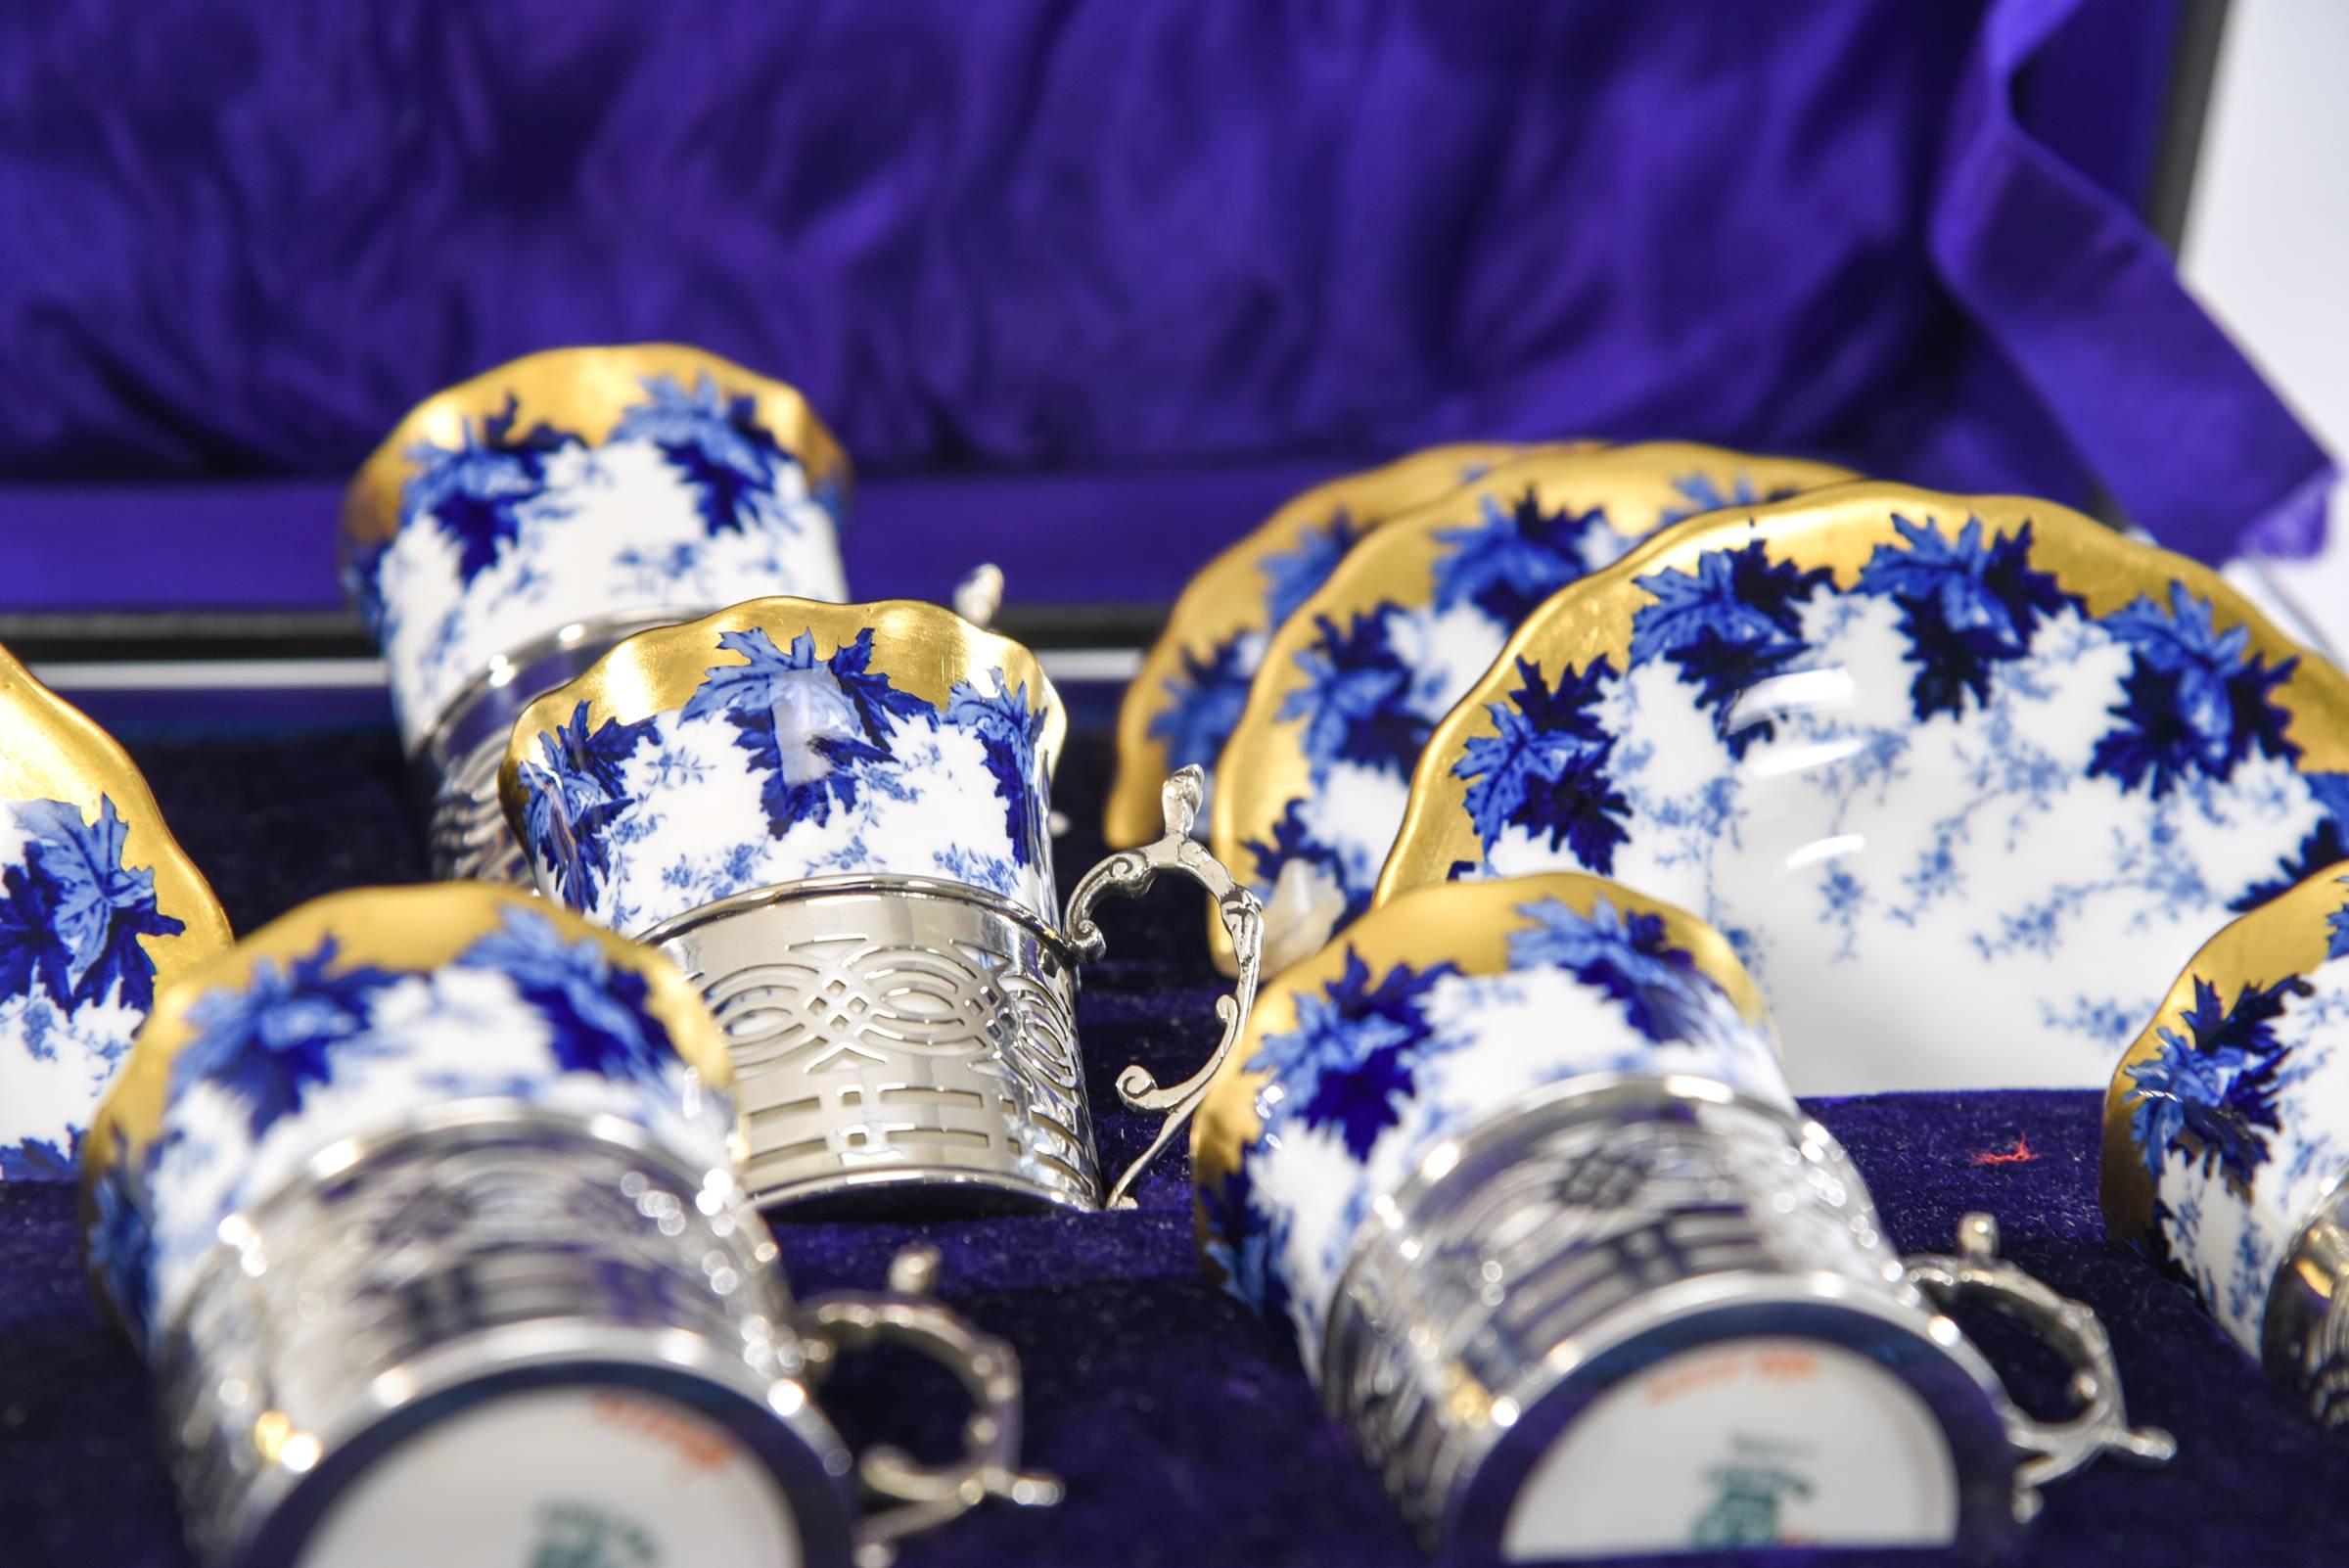 Aesthetic Movement Set of 12 Coalport Cups & Saucers W/ Cobalt, Gold, Sterling Silver Fittings